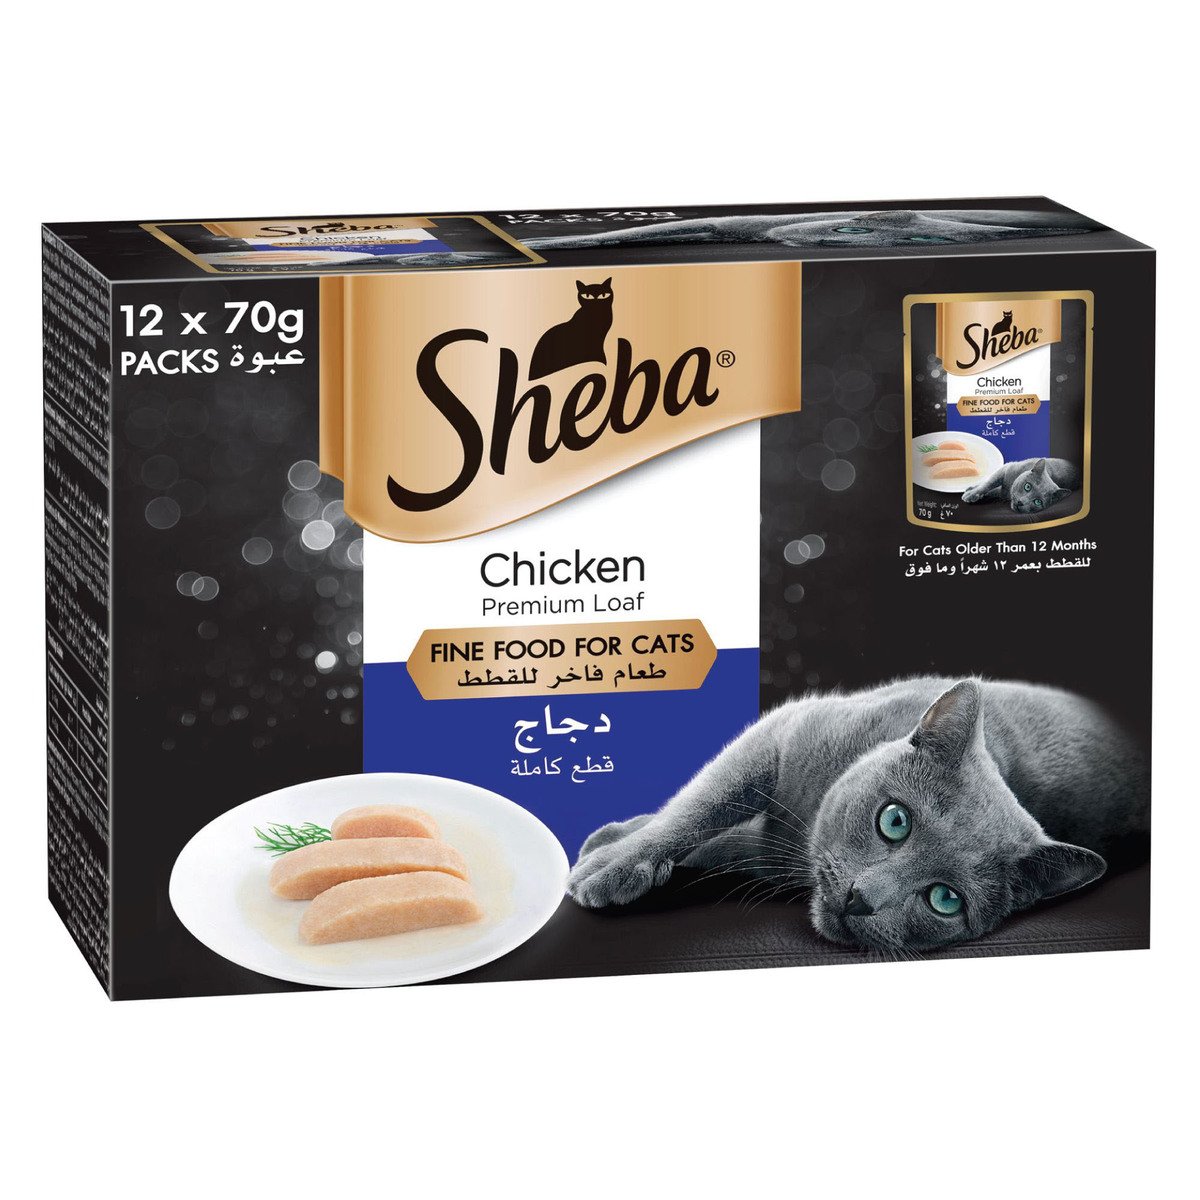 Sheba Chicken Premium Loaf Fine Food for Cats 70 g